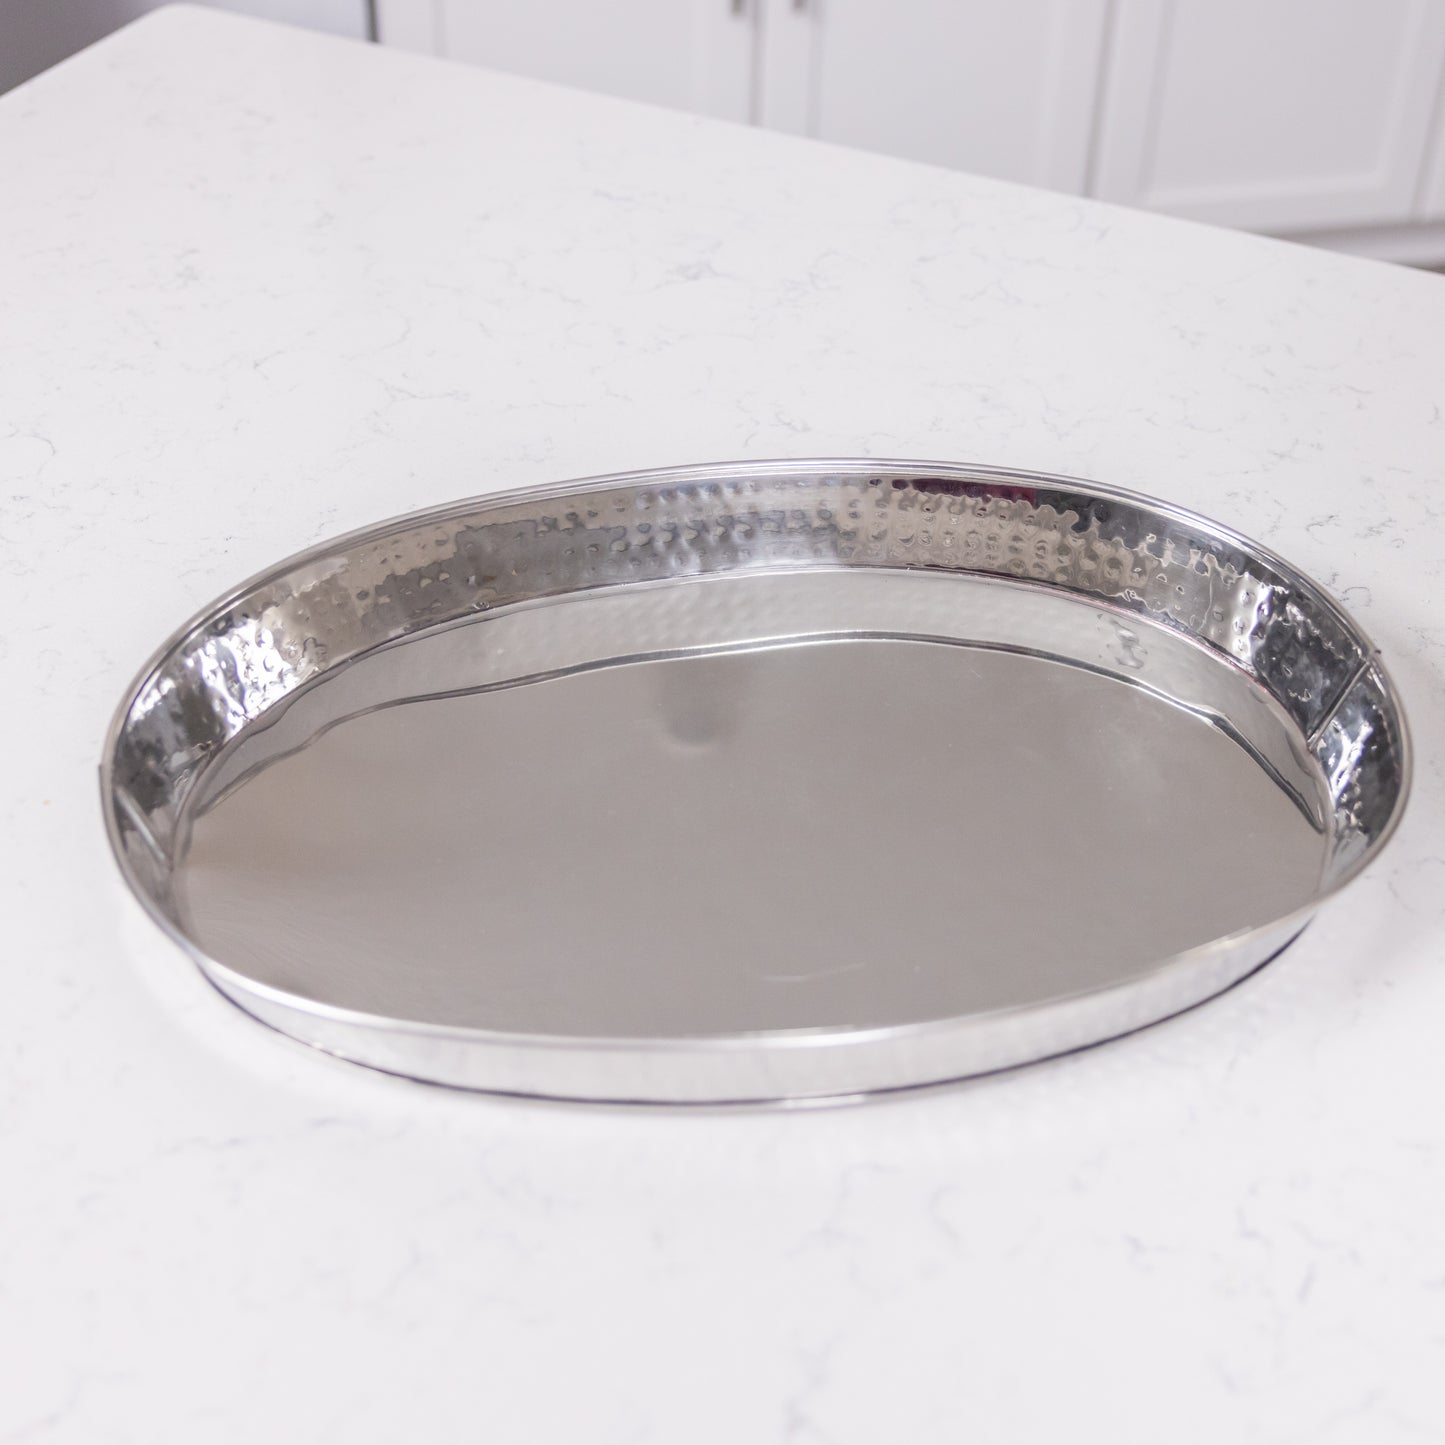 Serving Tray Hammered in Stainless Steel - Kingston